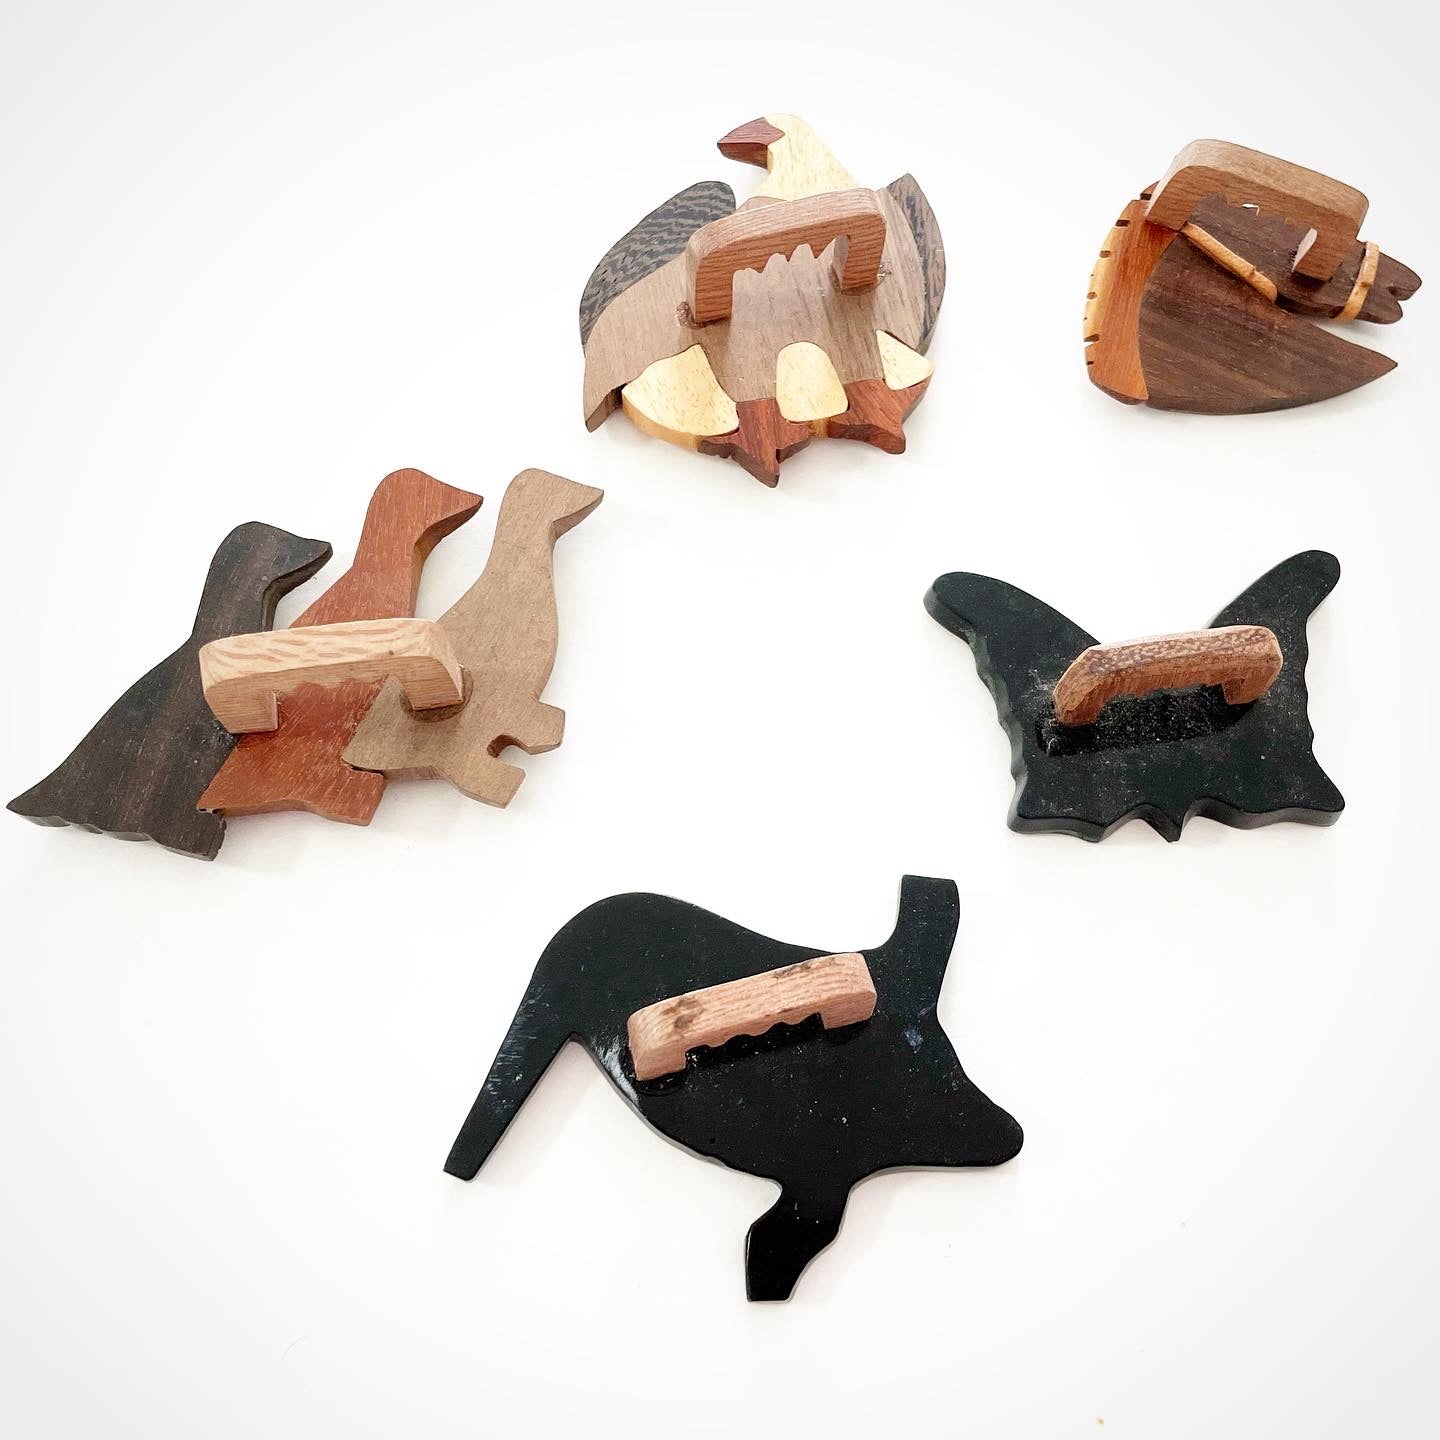 Wooden Scarf Ring (Horse Head with Leather Bridle) 木製絲巾扣 (駿馬籠頭)